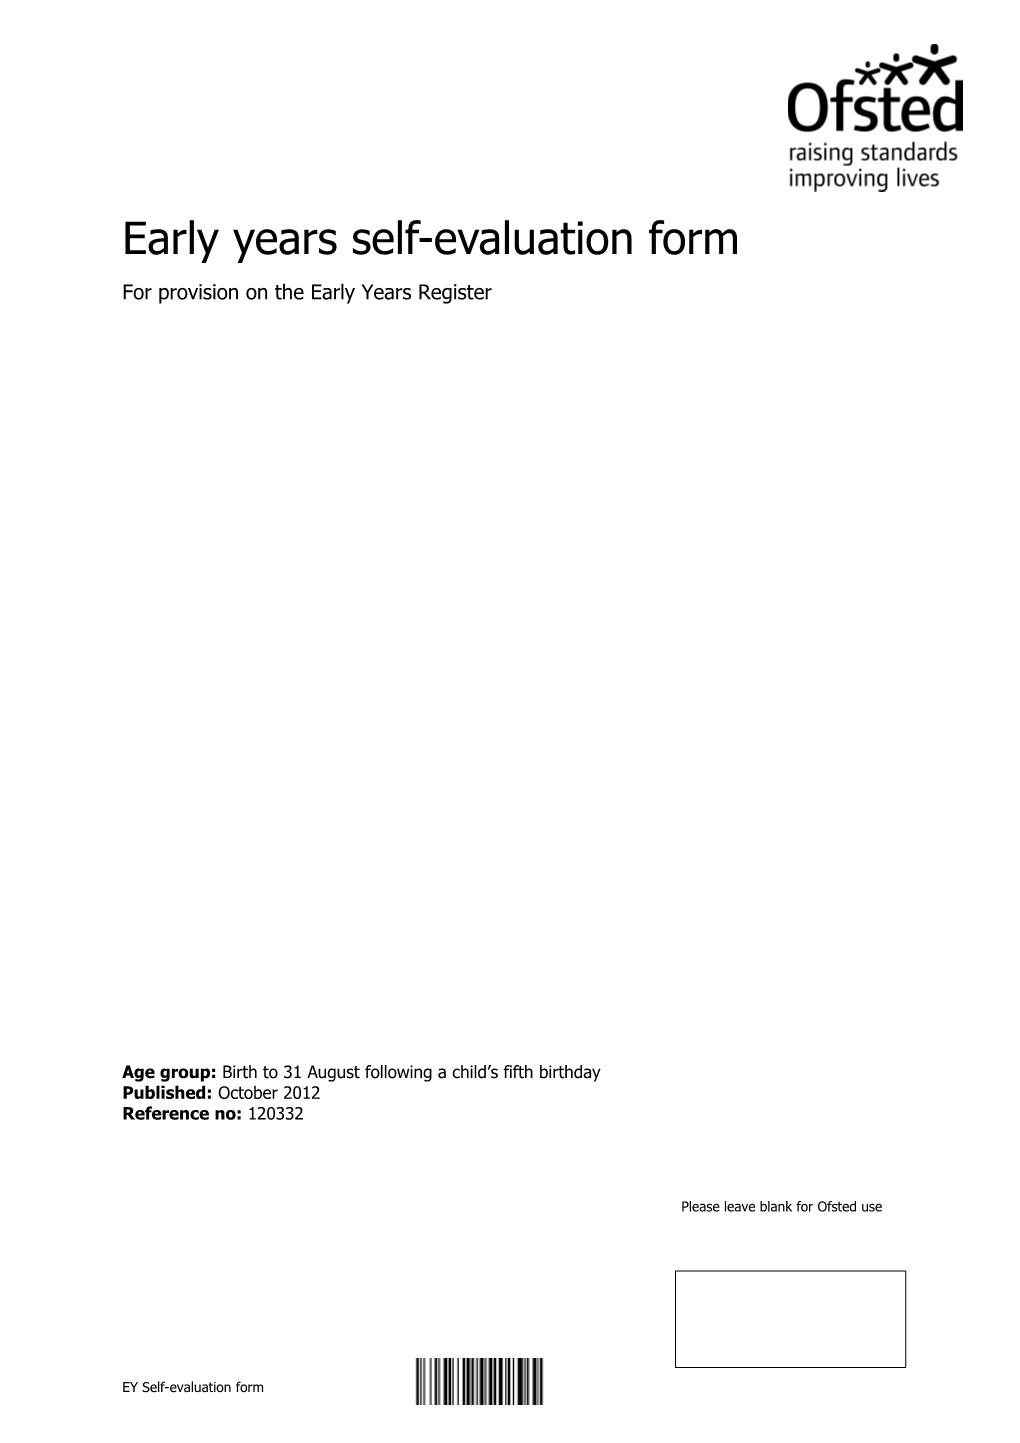 Early Years Self-Evaluation Form s1